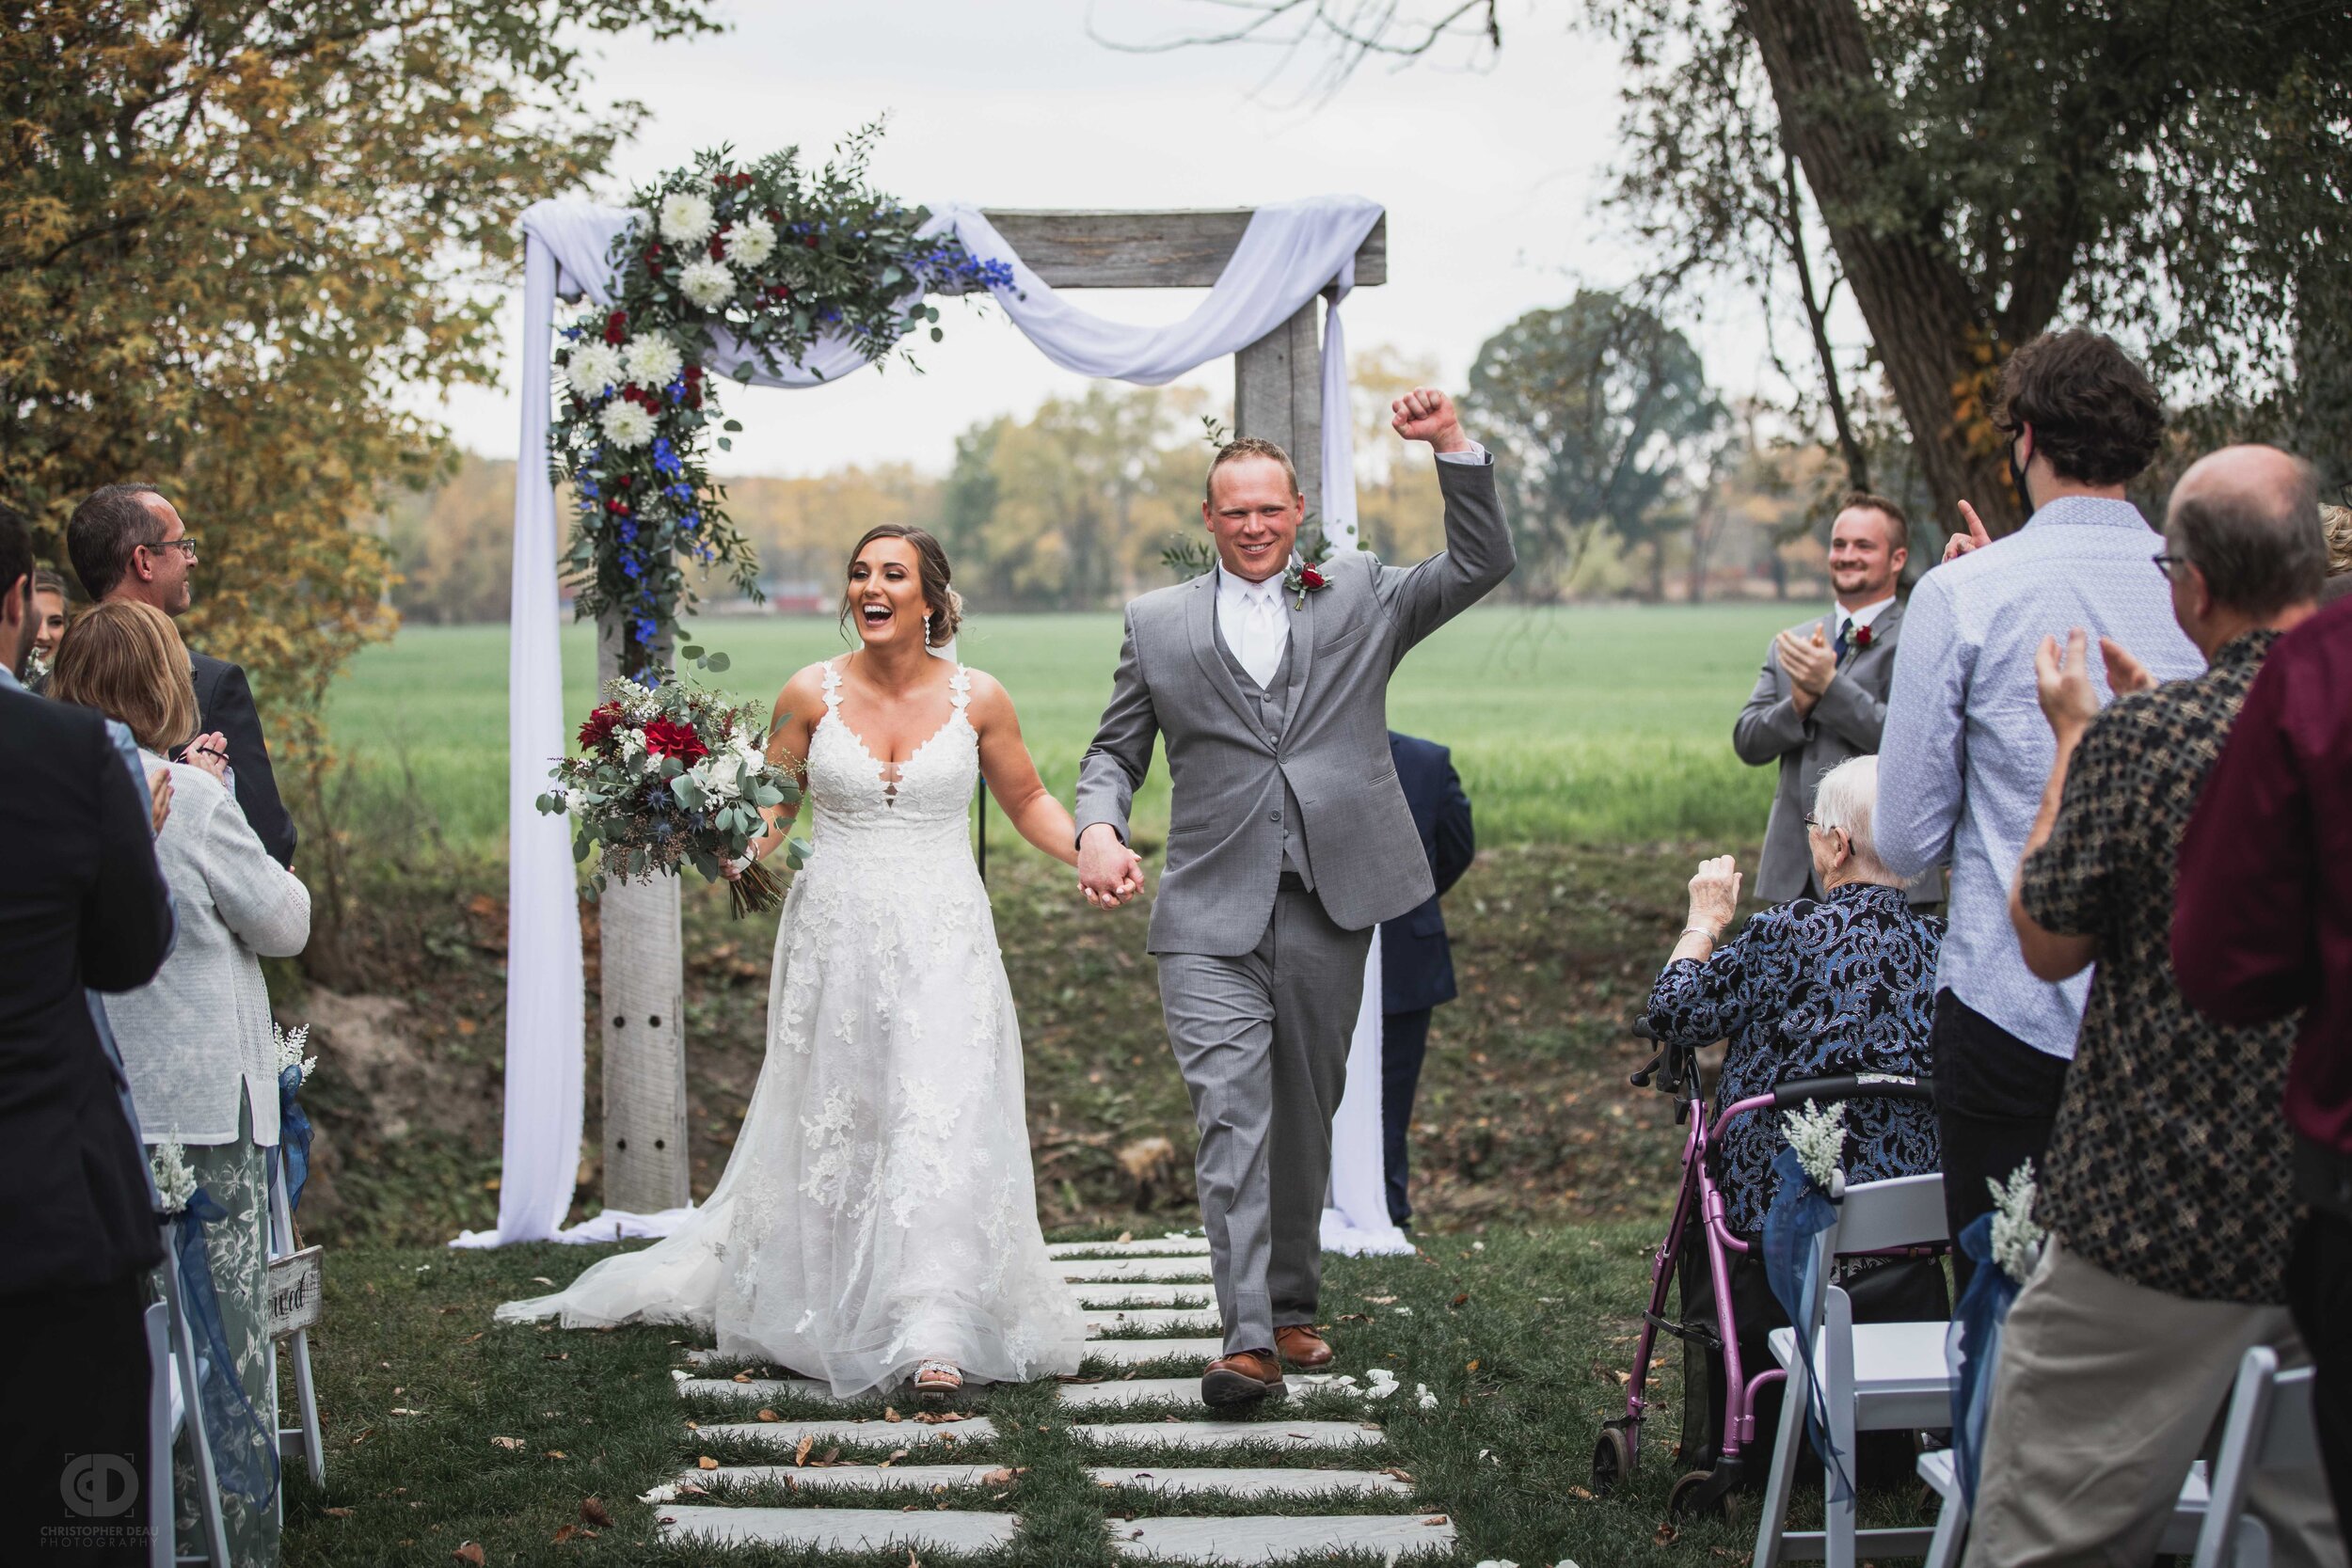  bride and groom cheer during wedding ceremony recessional  